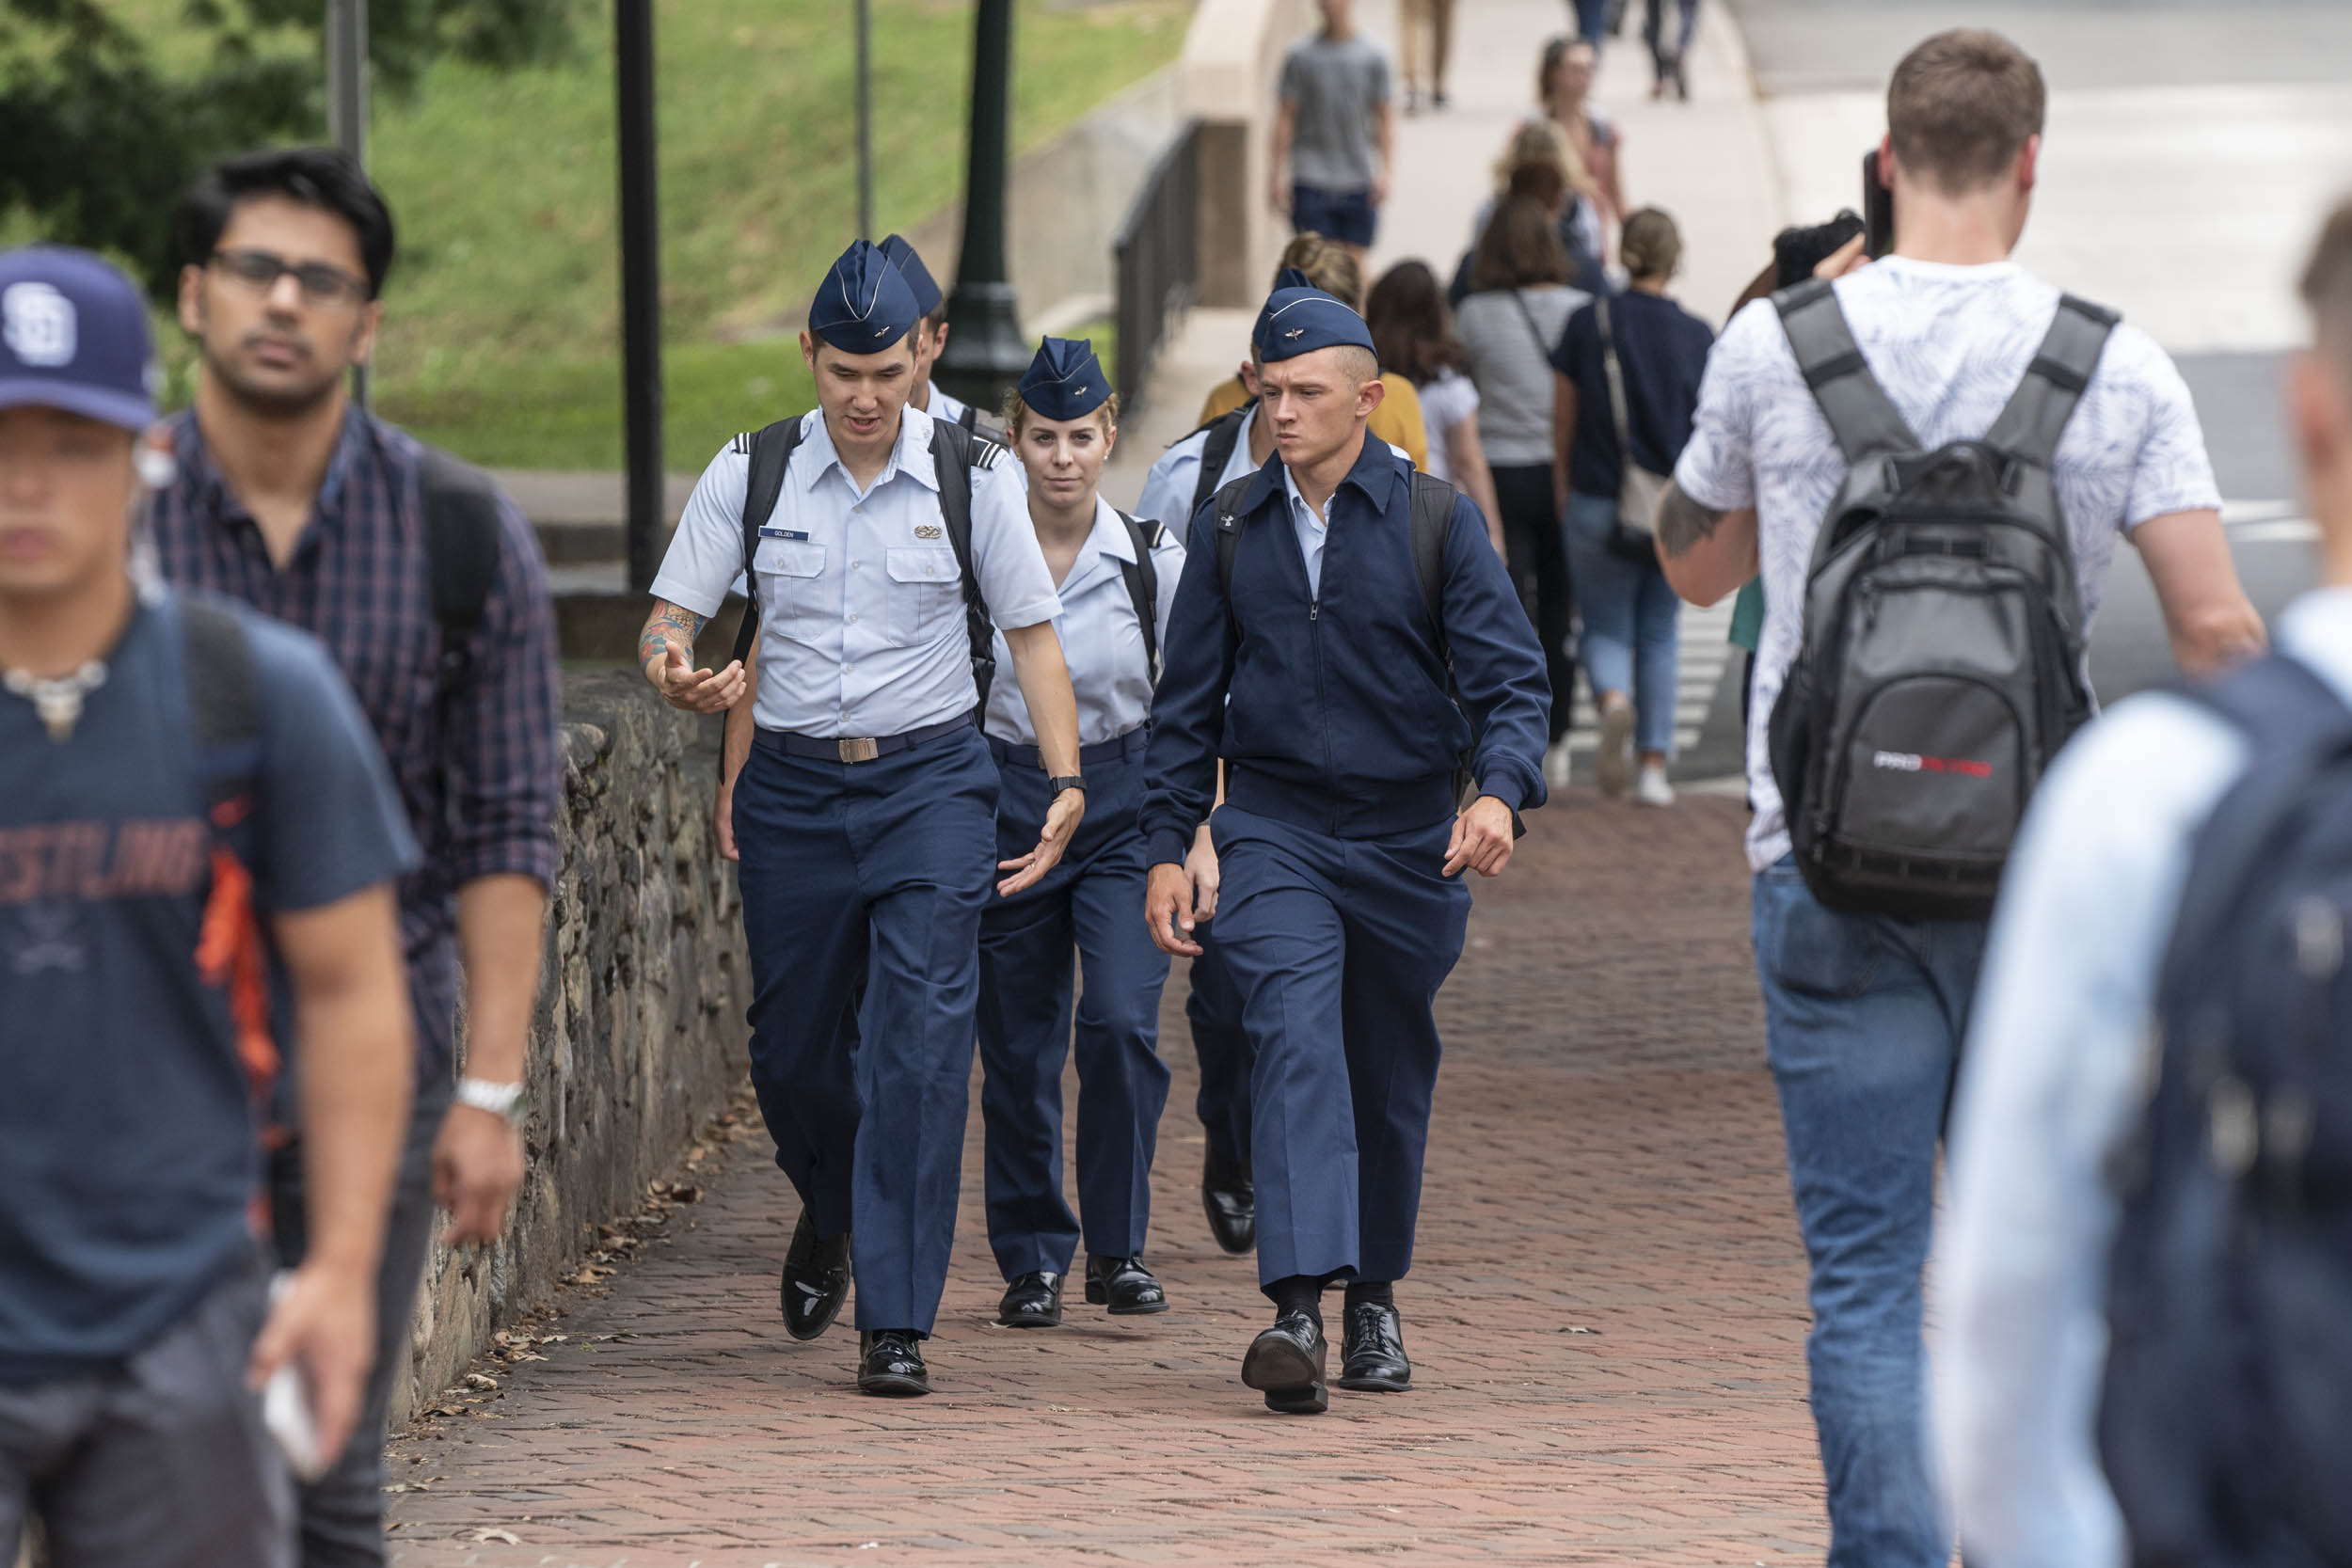 ROTC Air Force Cadets walking on a sidewalk on grounds